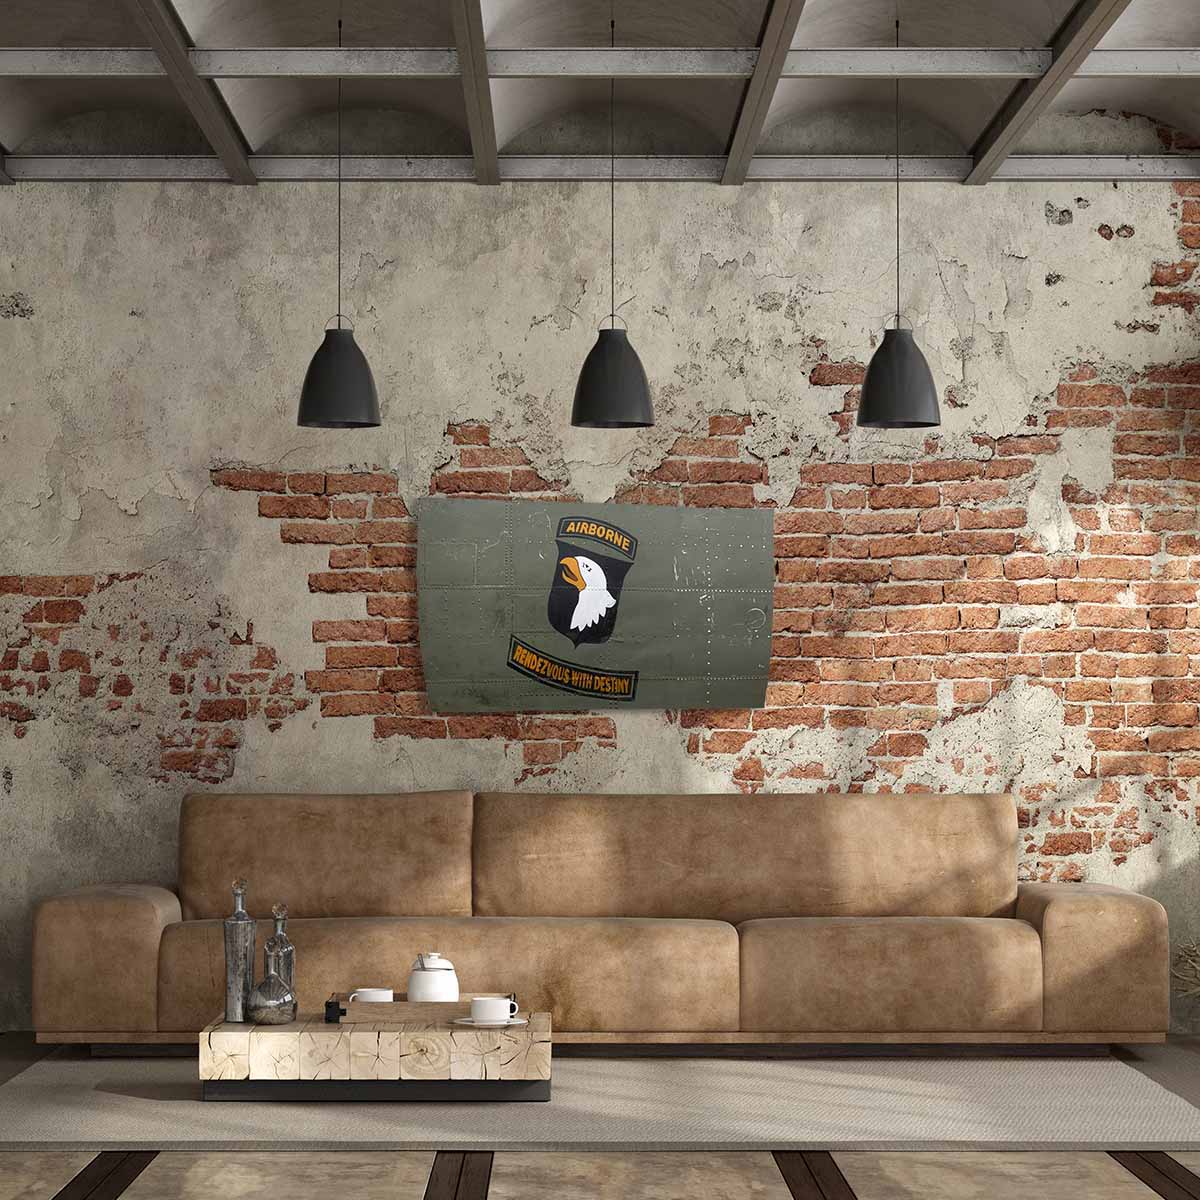 Original C-47 Dakota skin panel painted with 101st Airborne Division nose art hanging in an industrial style living room.